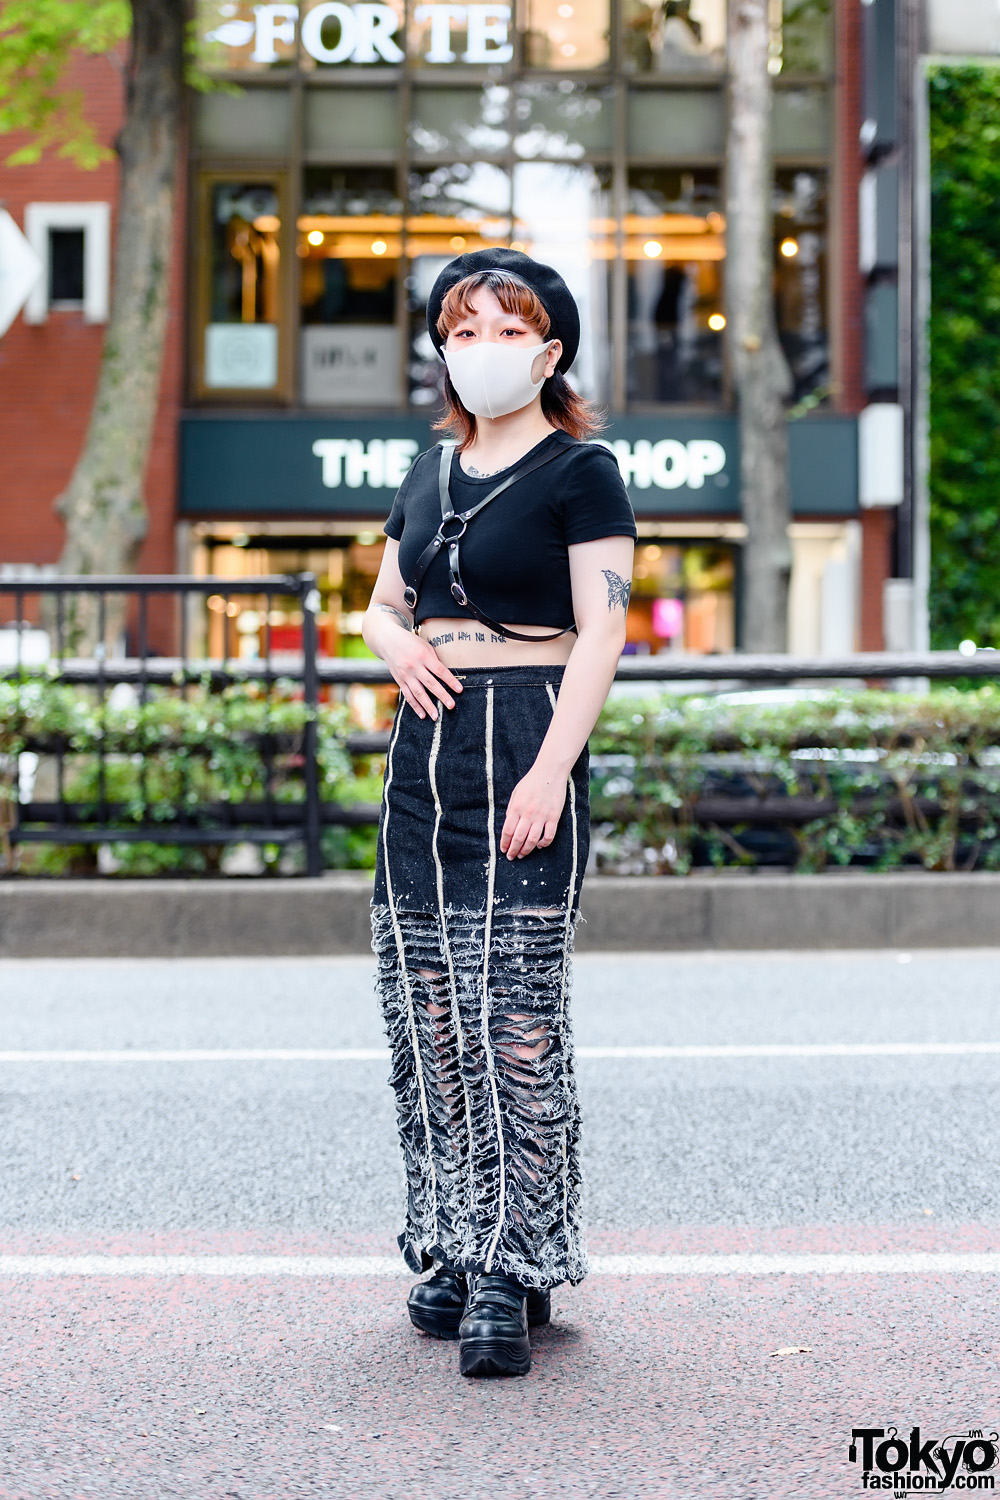 Dark Tokyo Street Style in Harajuku w/ Butterfly Tattoos, Beret, Crop Top, Leather Harness, Remake Ripped Skirt & Platform Boots